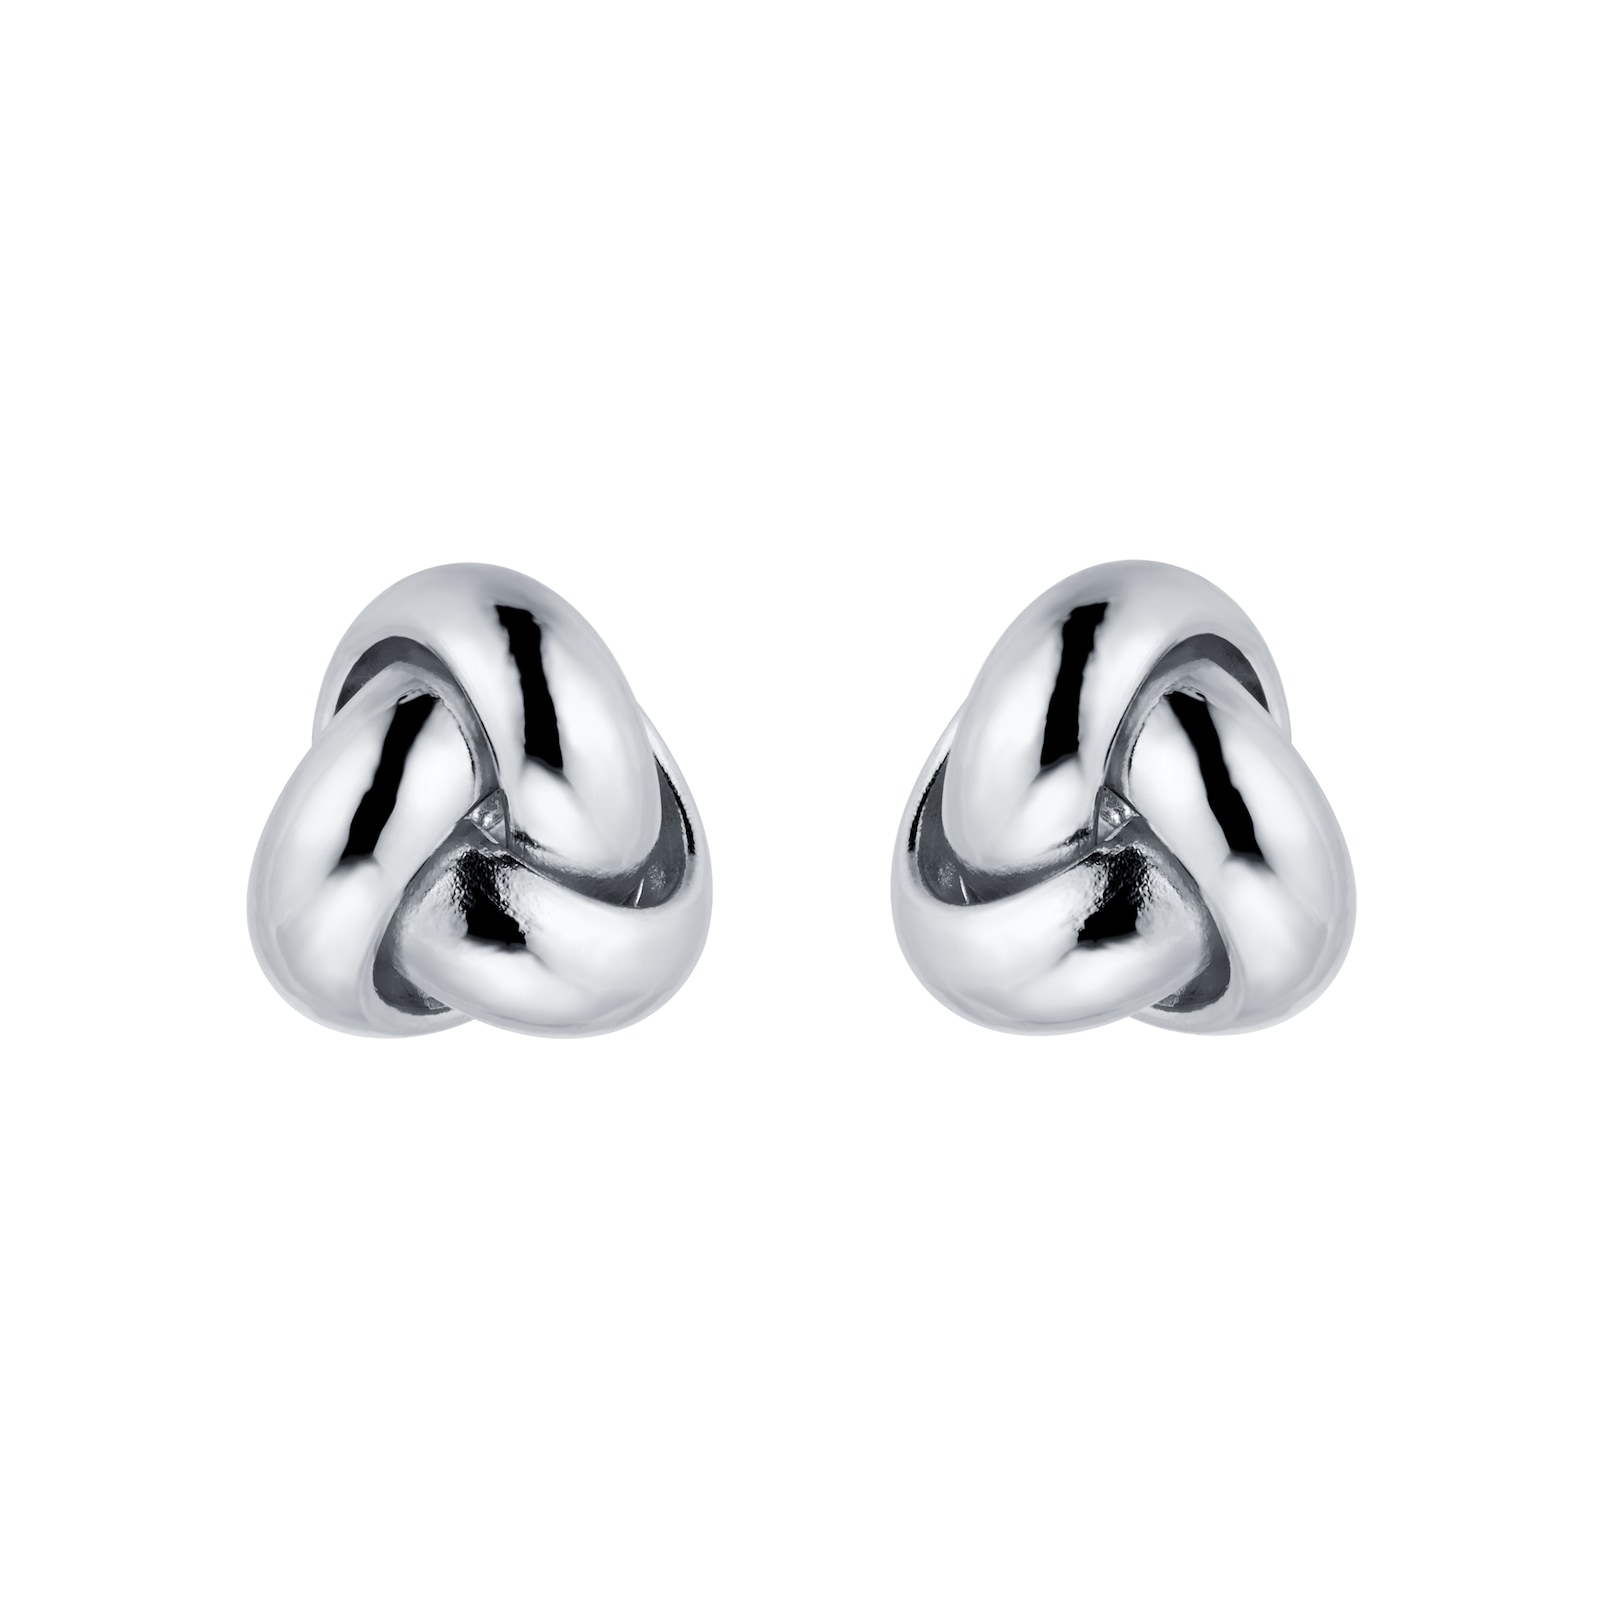 Goldsmiths 9ct White Gold Small Knot Stud Earrings 5.55.6239 | Goldsmiths